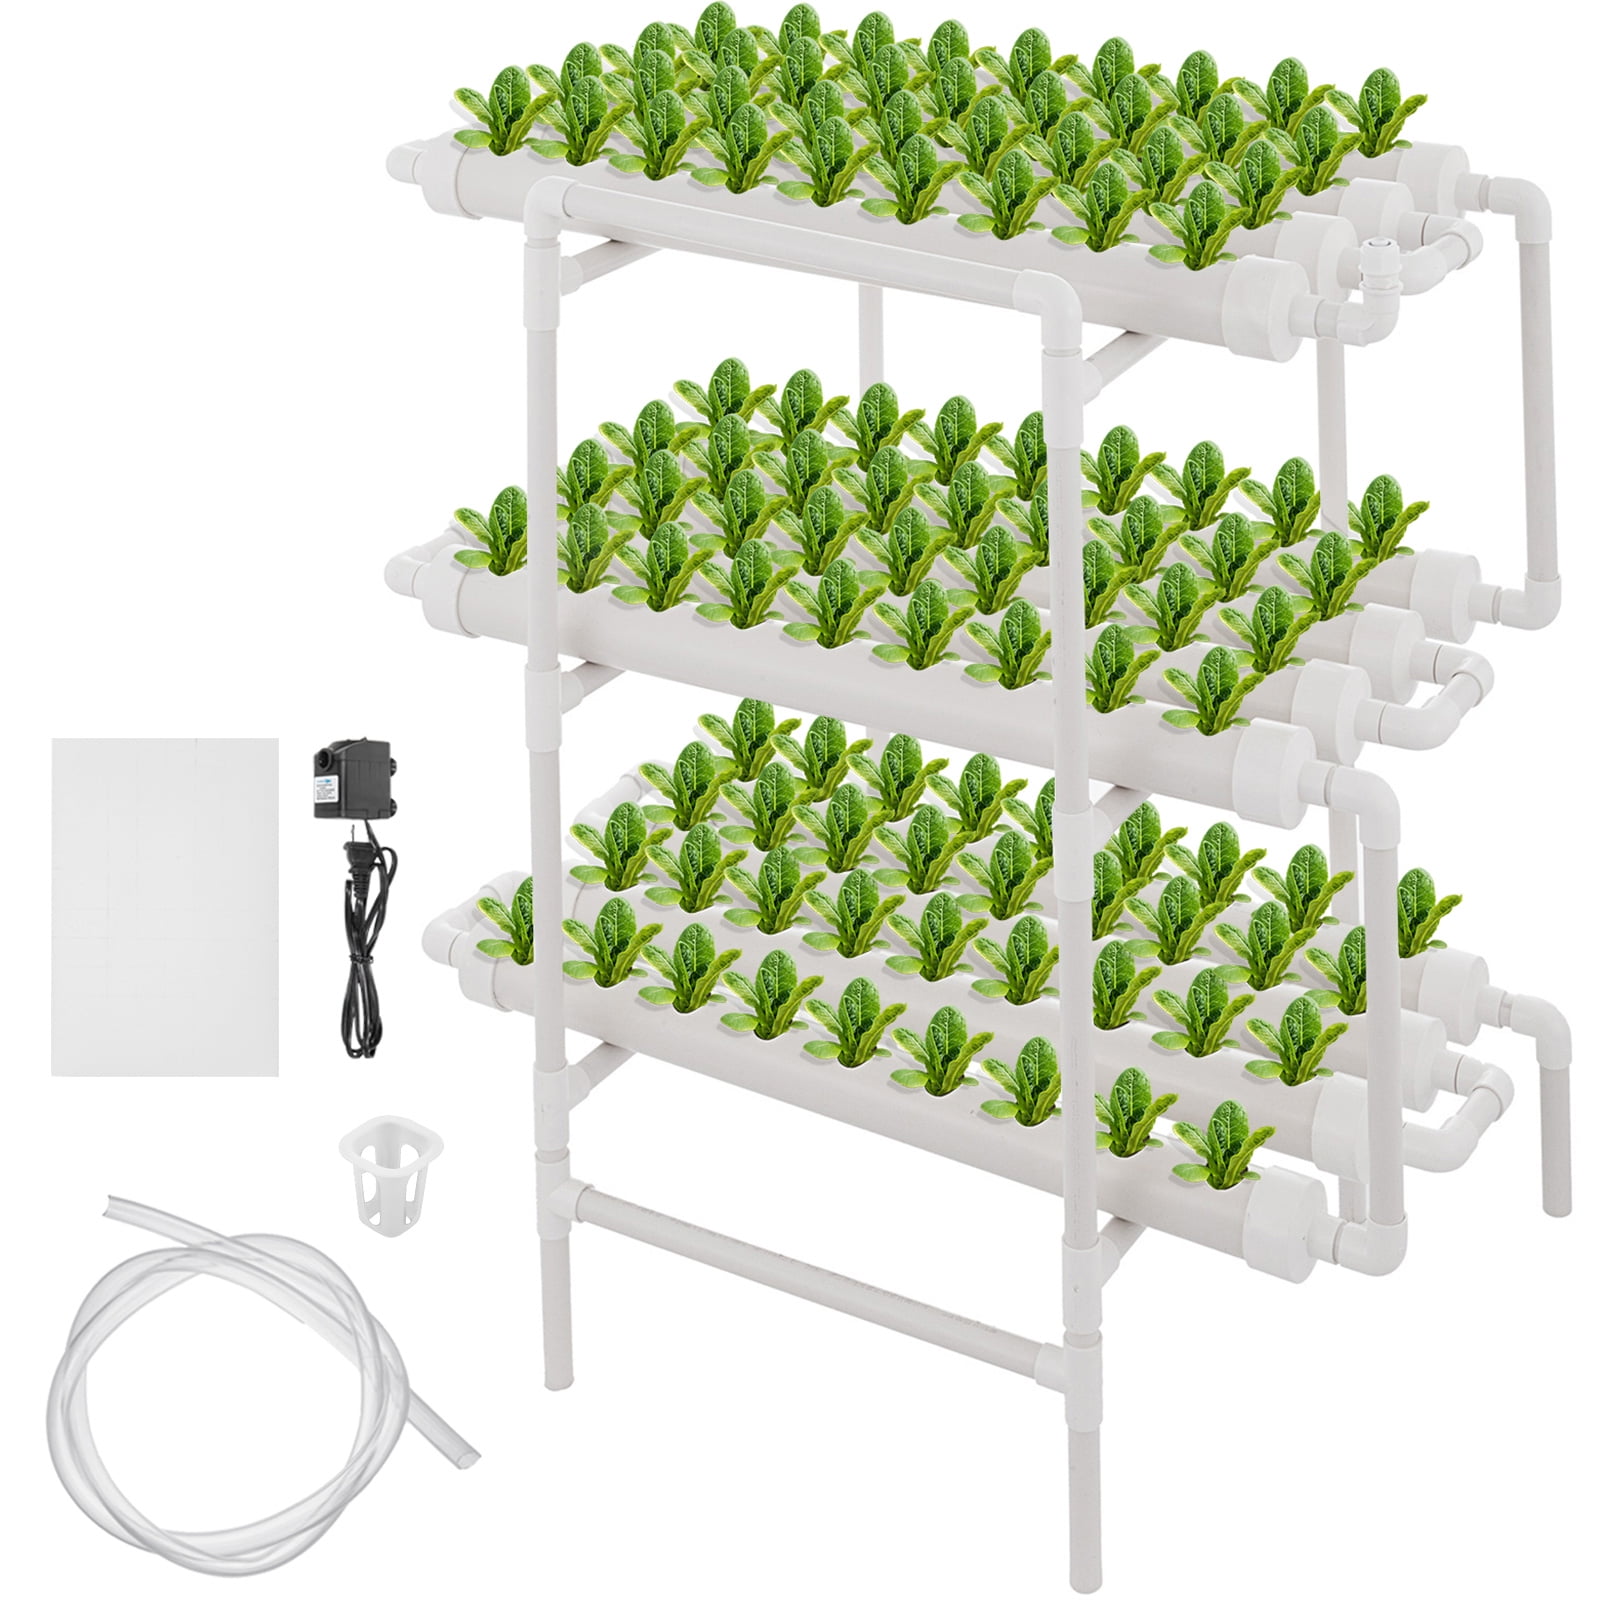 Details about   108 Plants Sites 12 Pipes Hydroponic Grow Tool Kits Garden Vegetable NFT System 